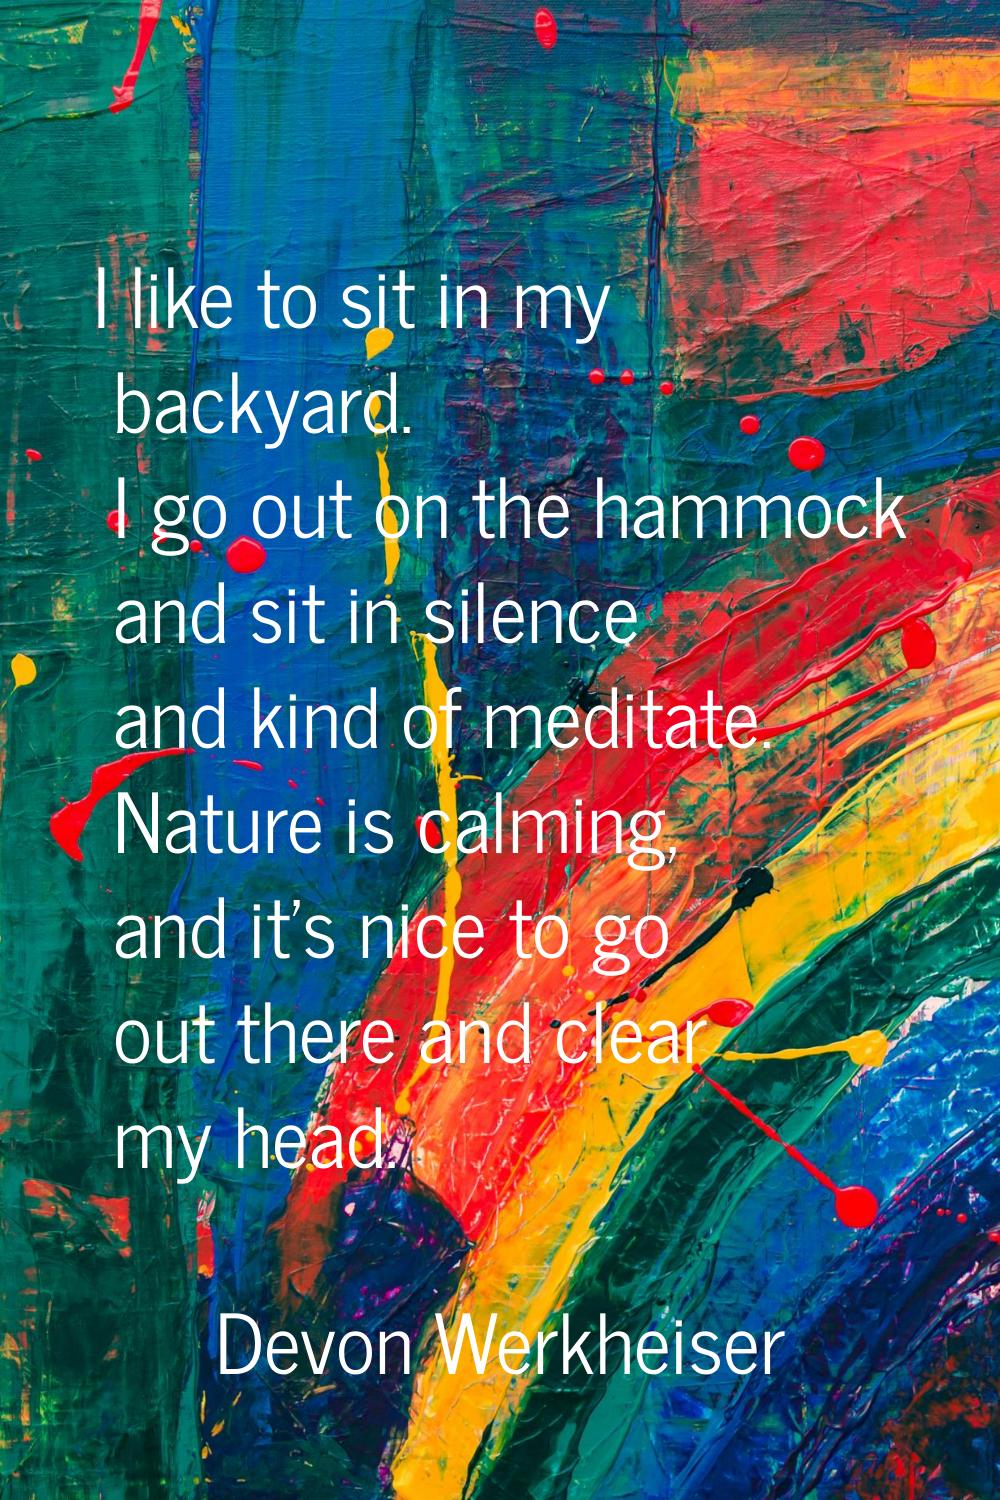 I like to sit in my backyard. I go out on the hammock and sit in silence and kind of meditate. Natu